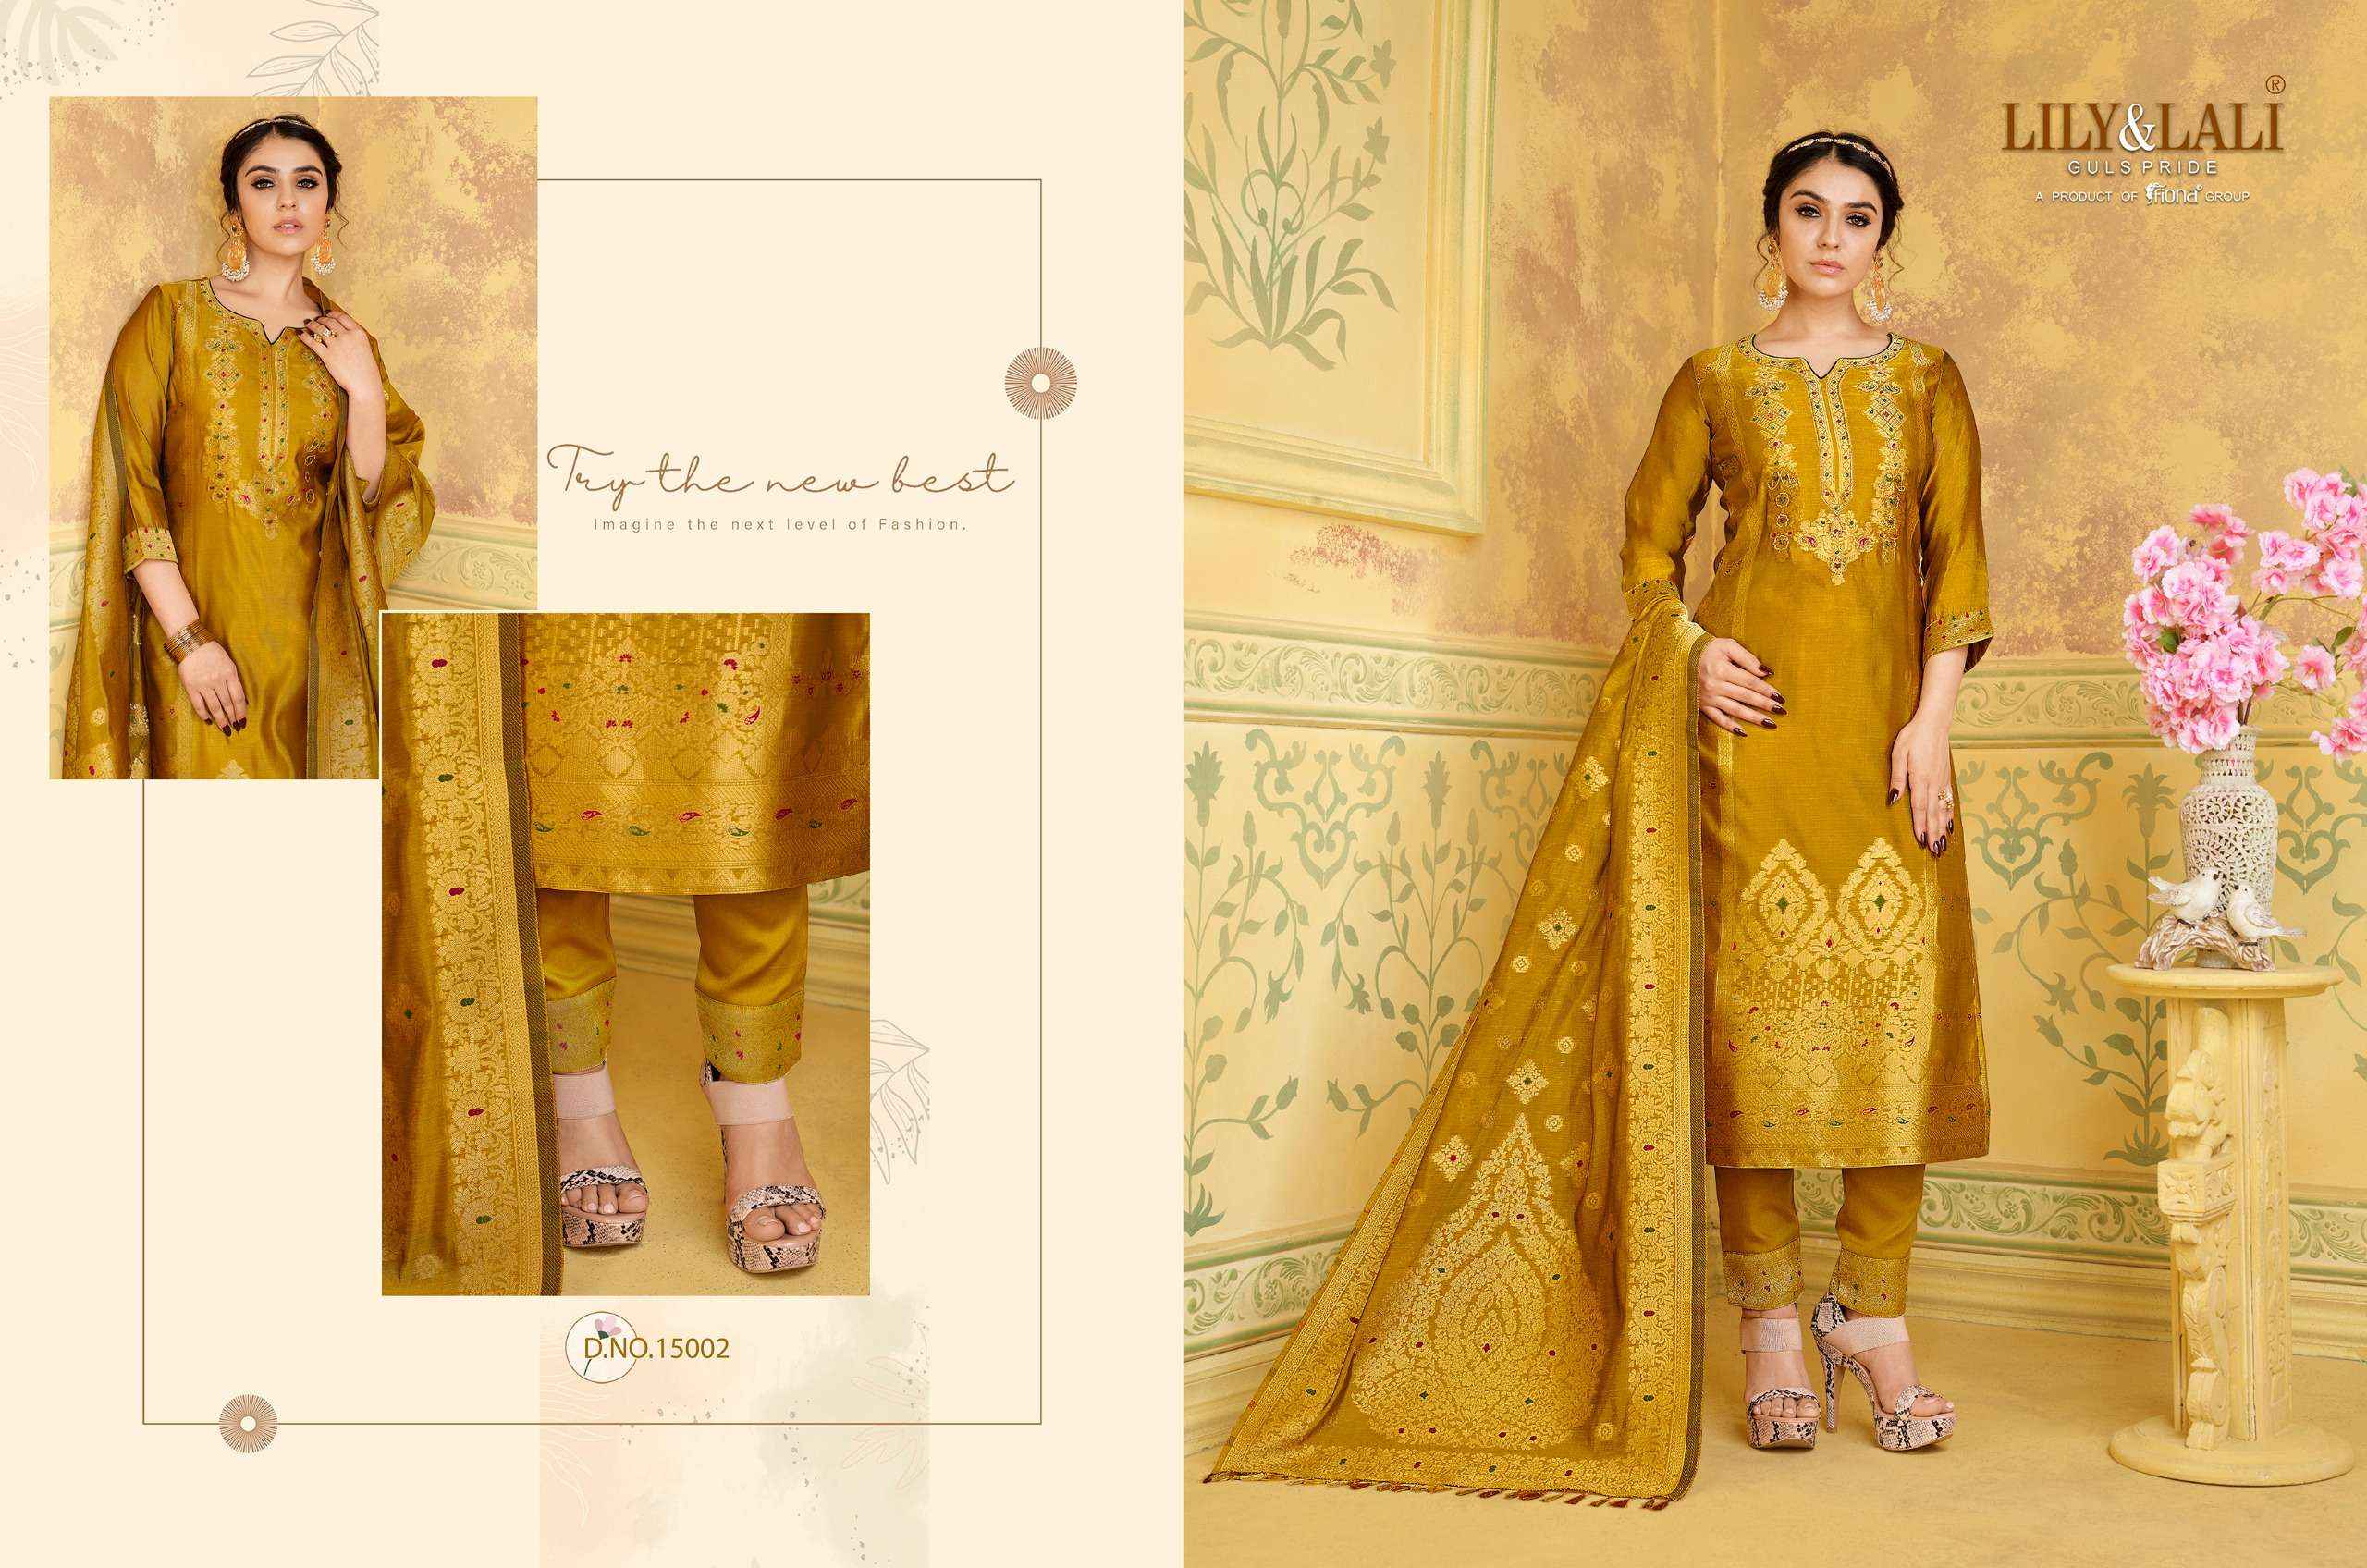 LILY AND LALI SILKYNESS JACQUARD DESIGNER SUITS